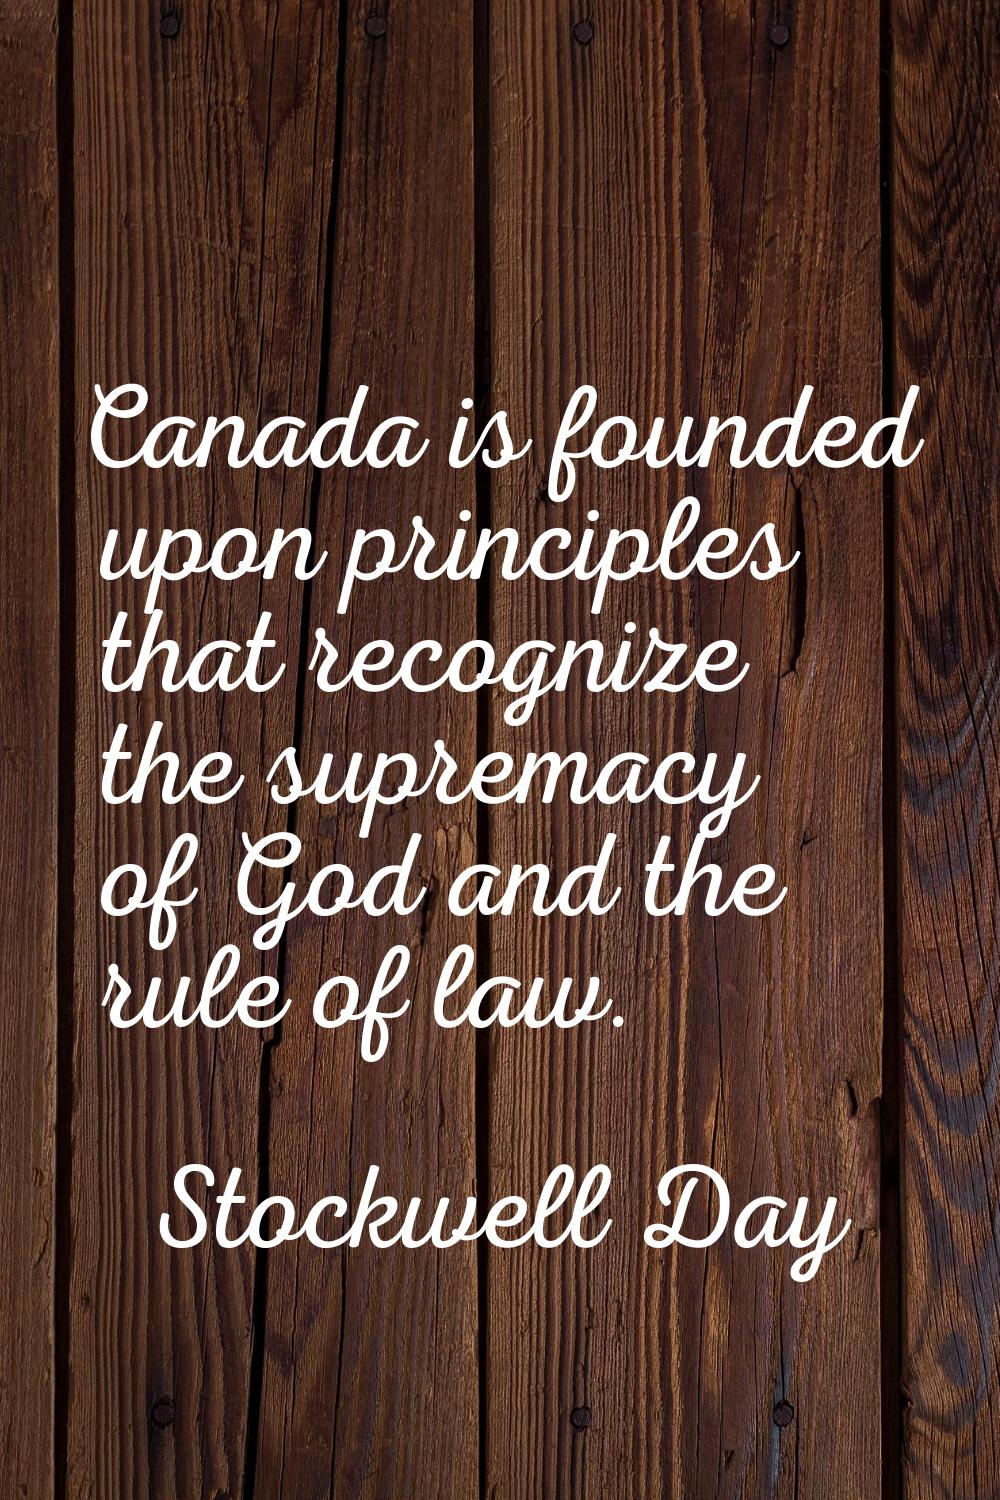 Canada is founded upon principles that recognize the supremacy of God and the rule of law.